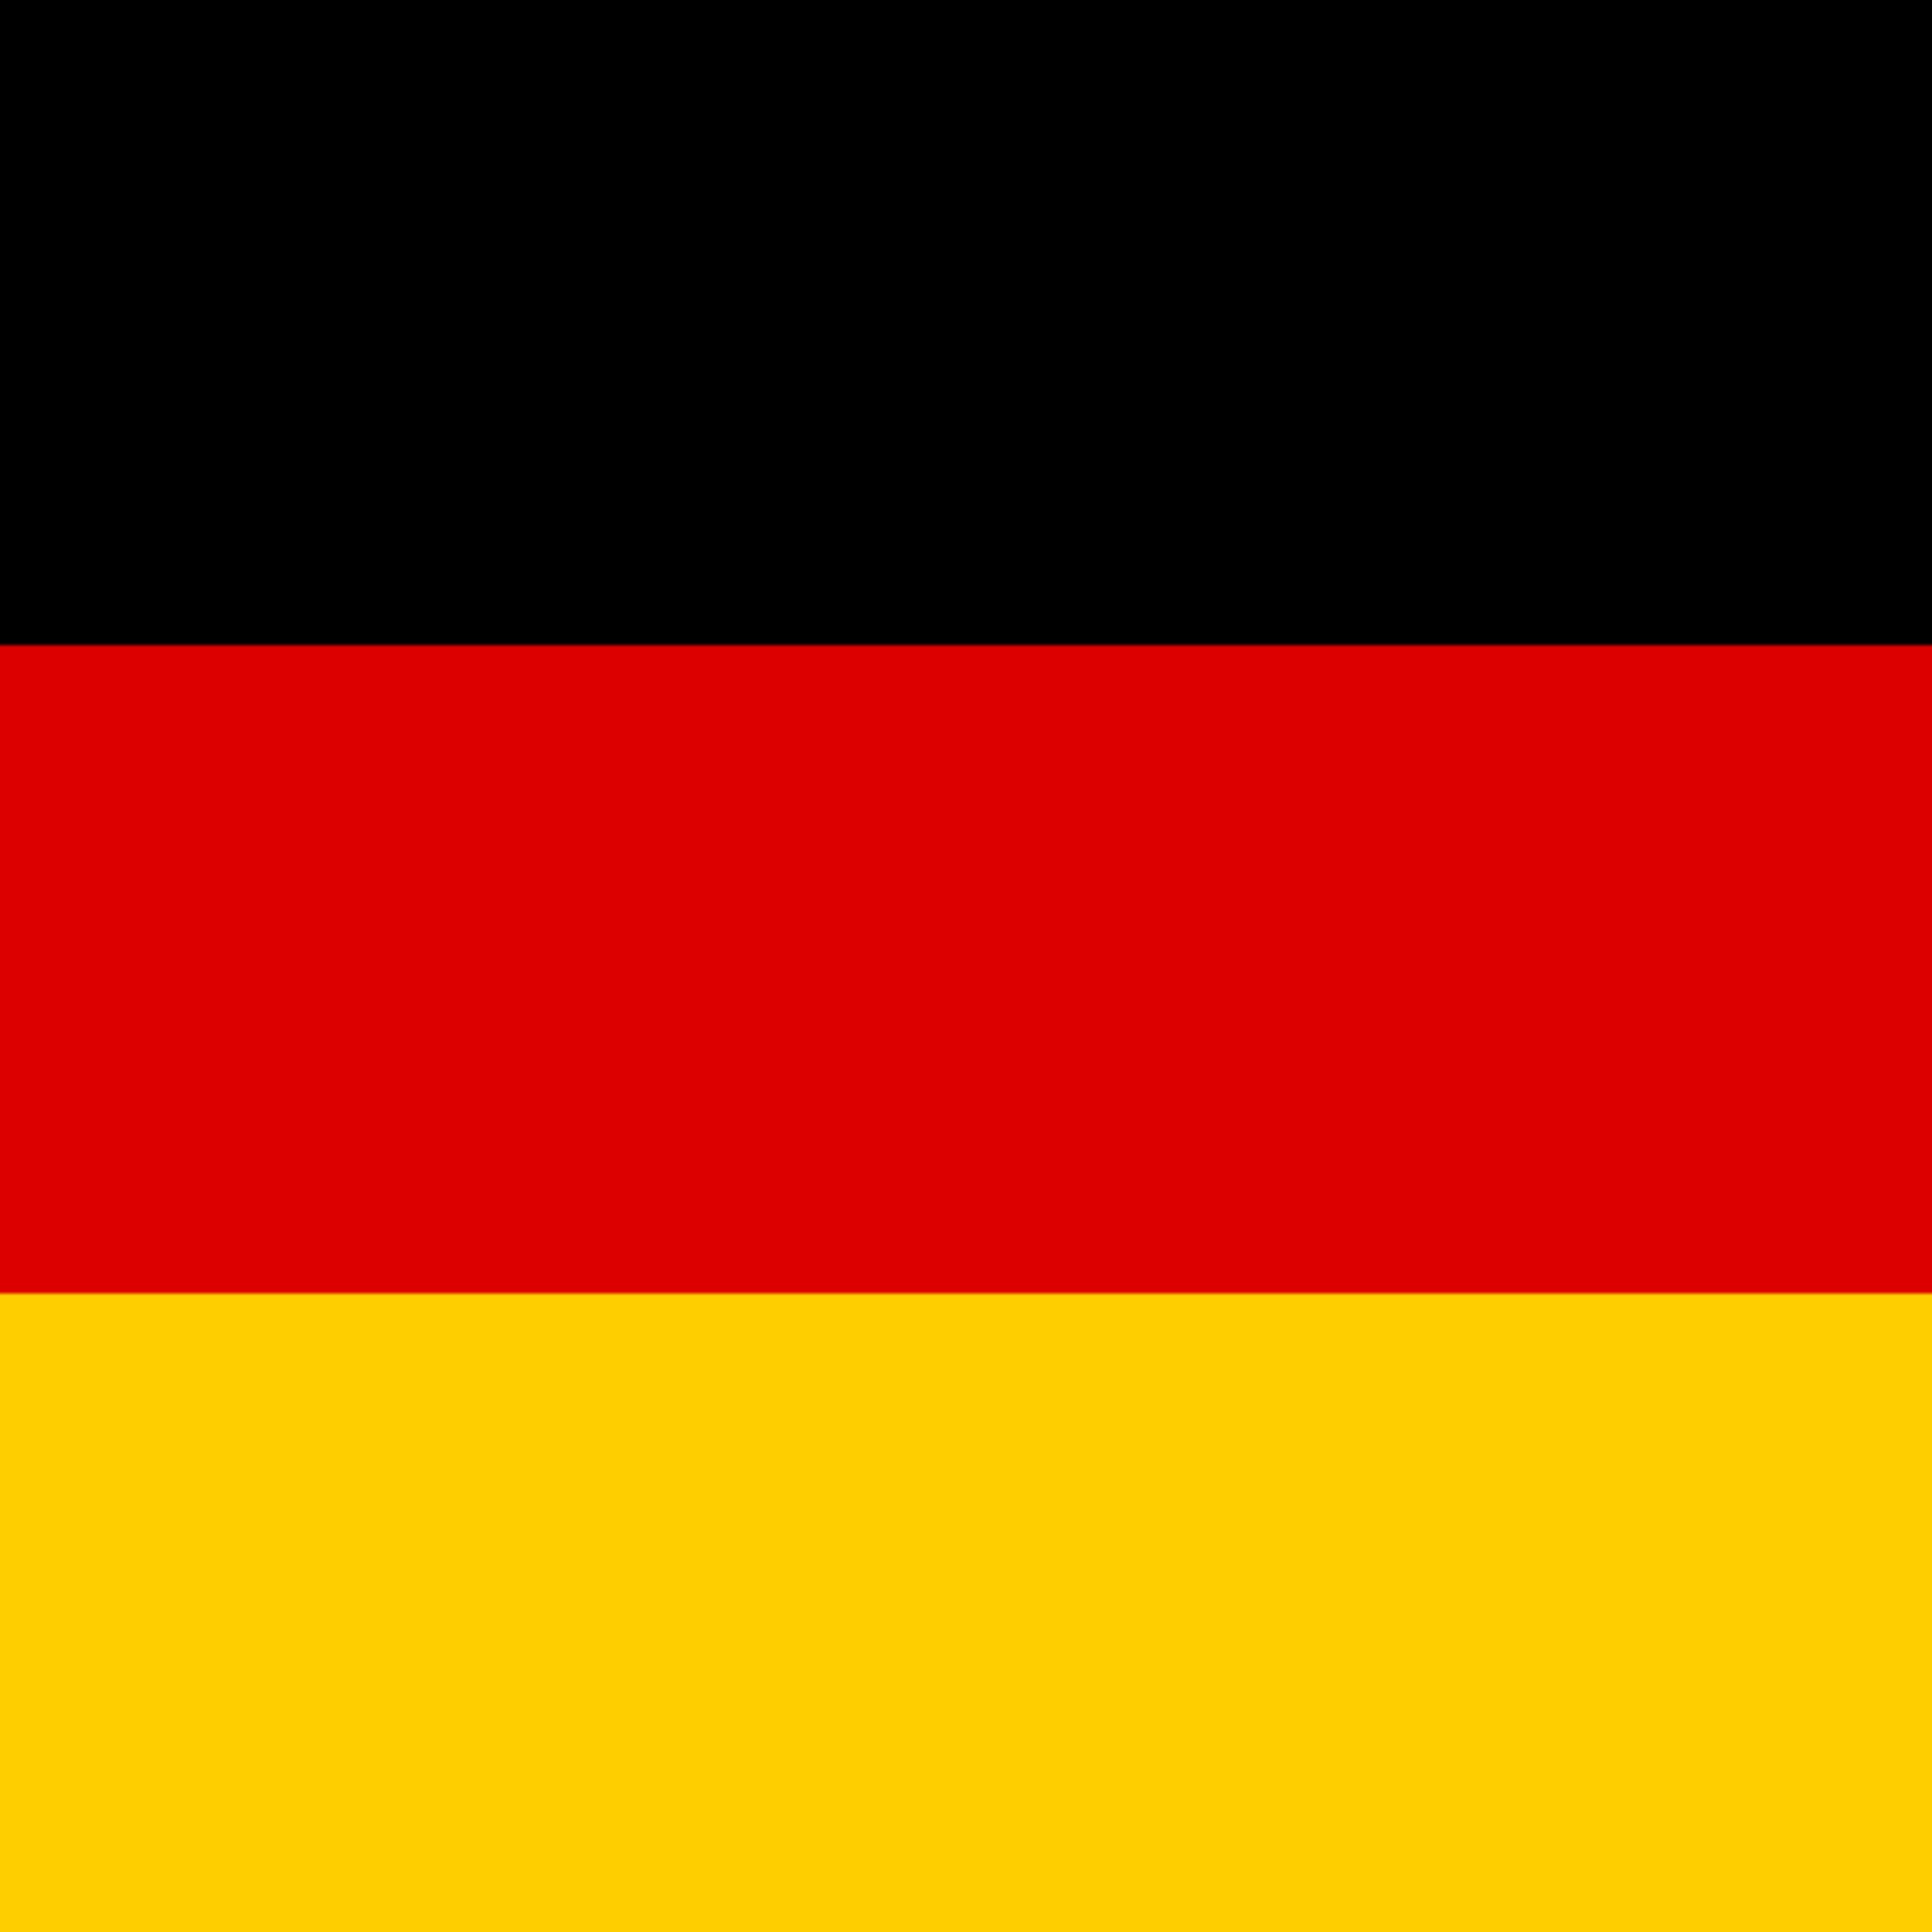 Honorary Consulate of Germany (Alicante) 